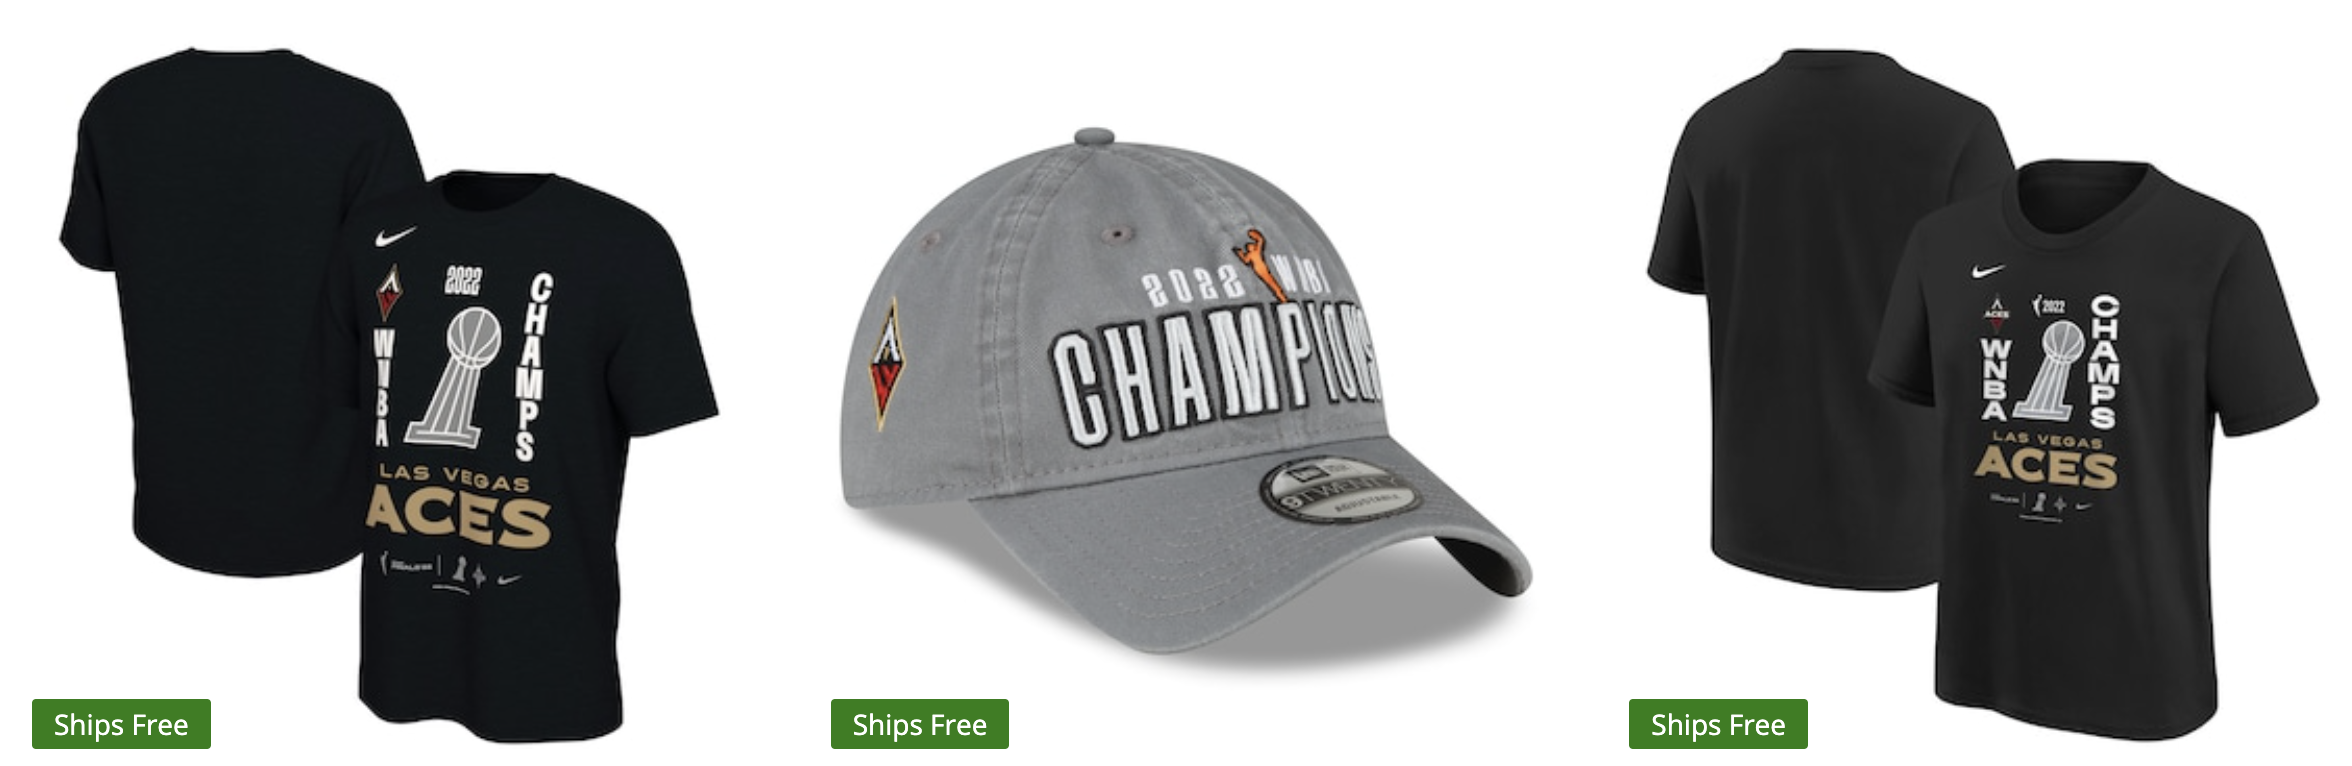 Hoopfeed.com 🏀 on X: Las Vegas Aces championship gear is now